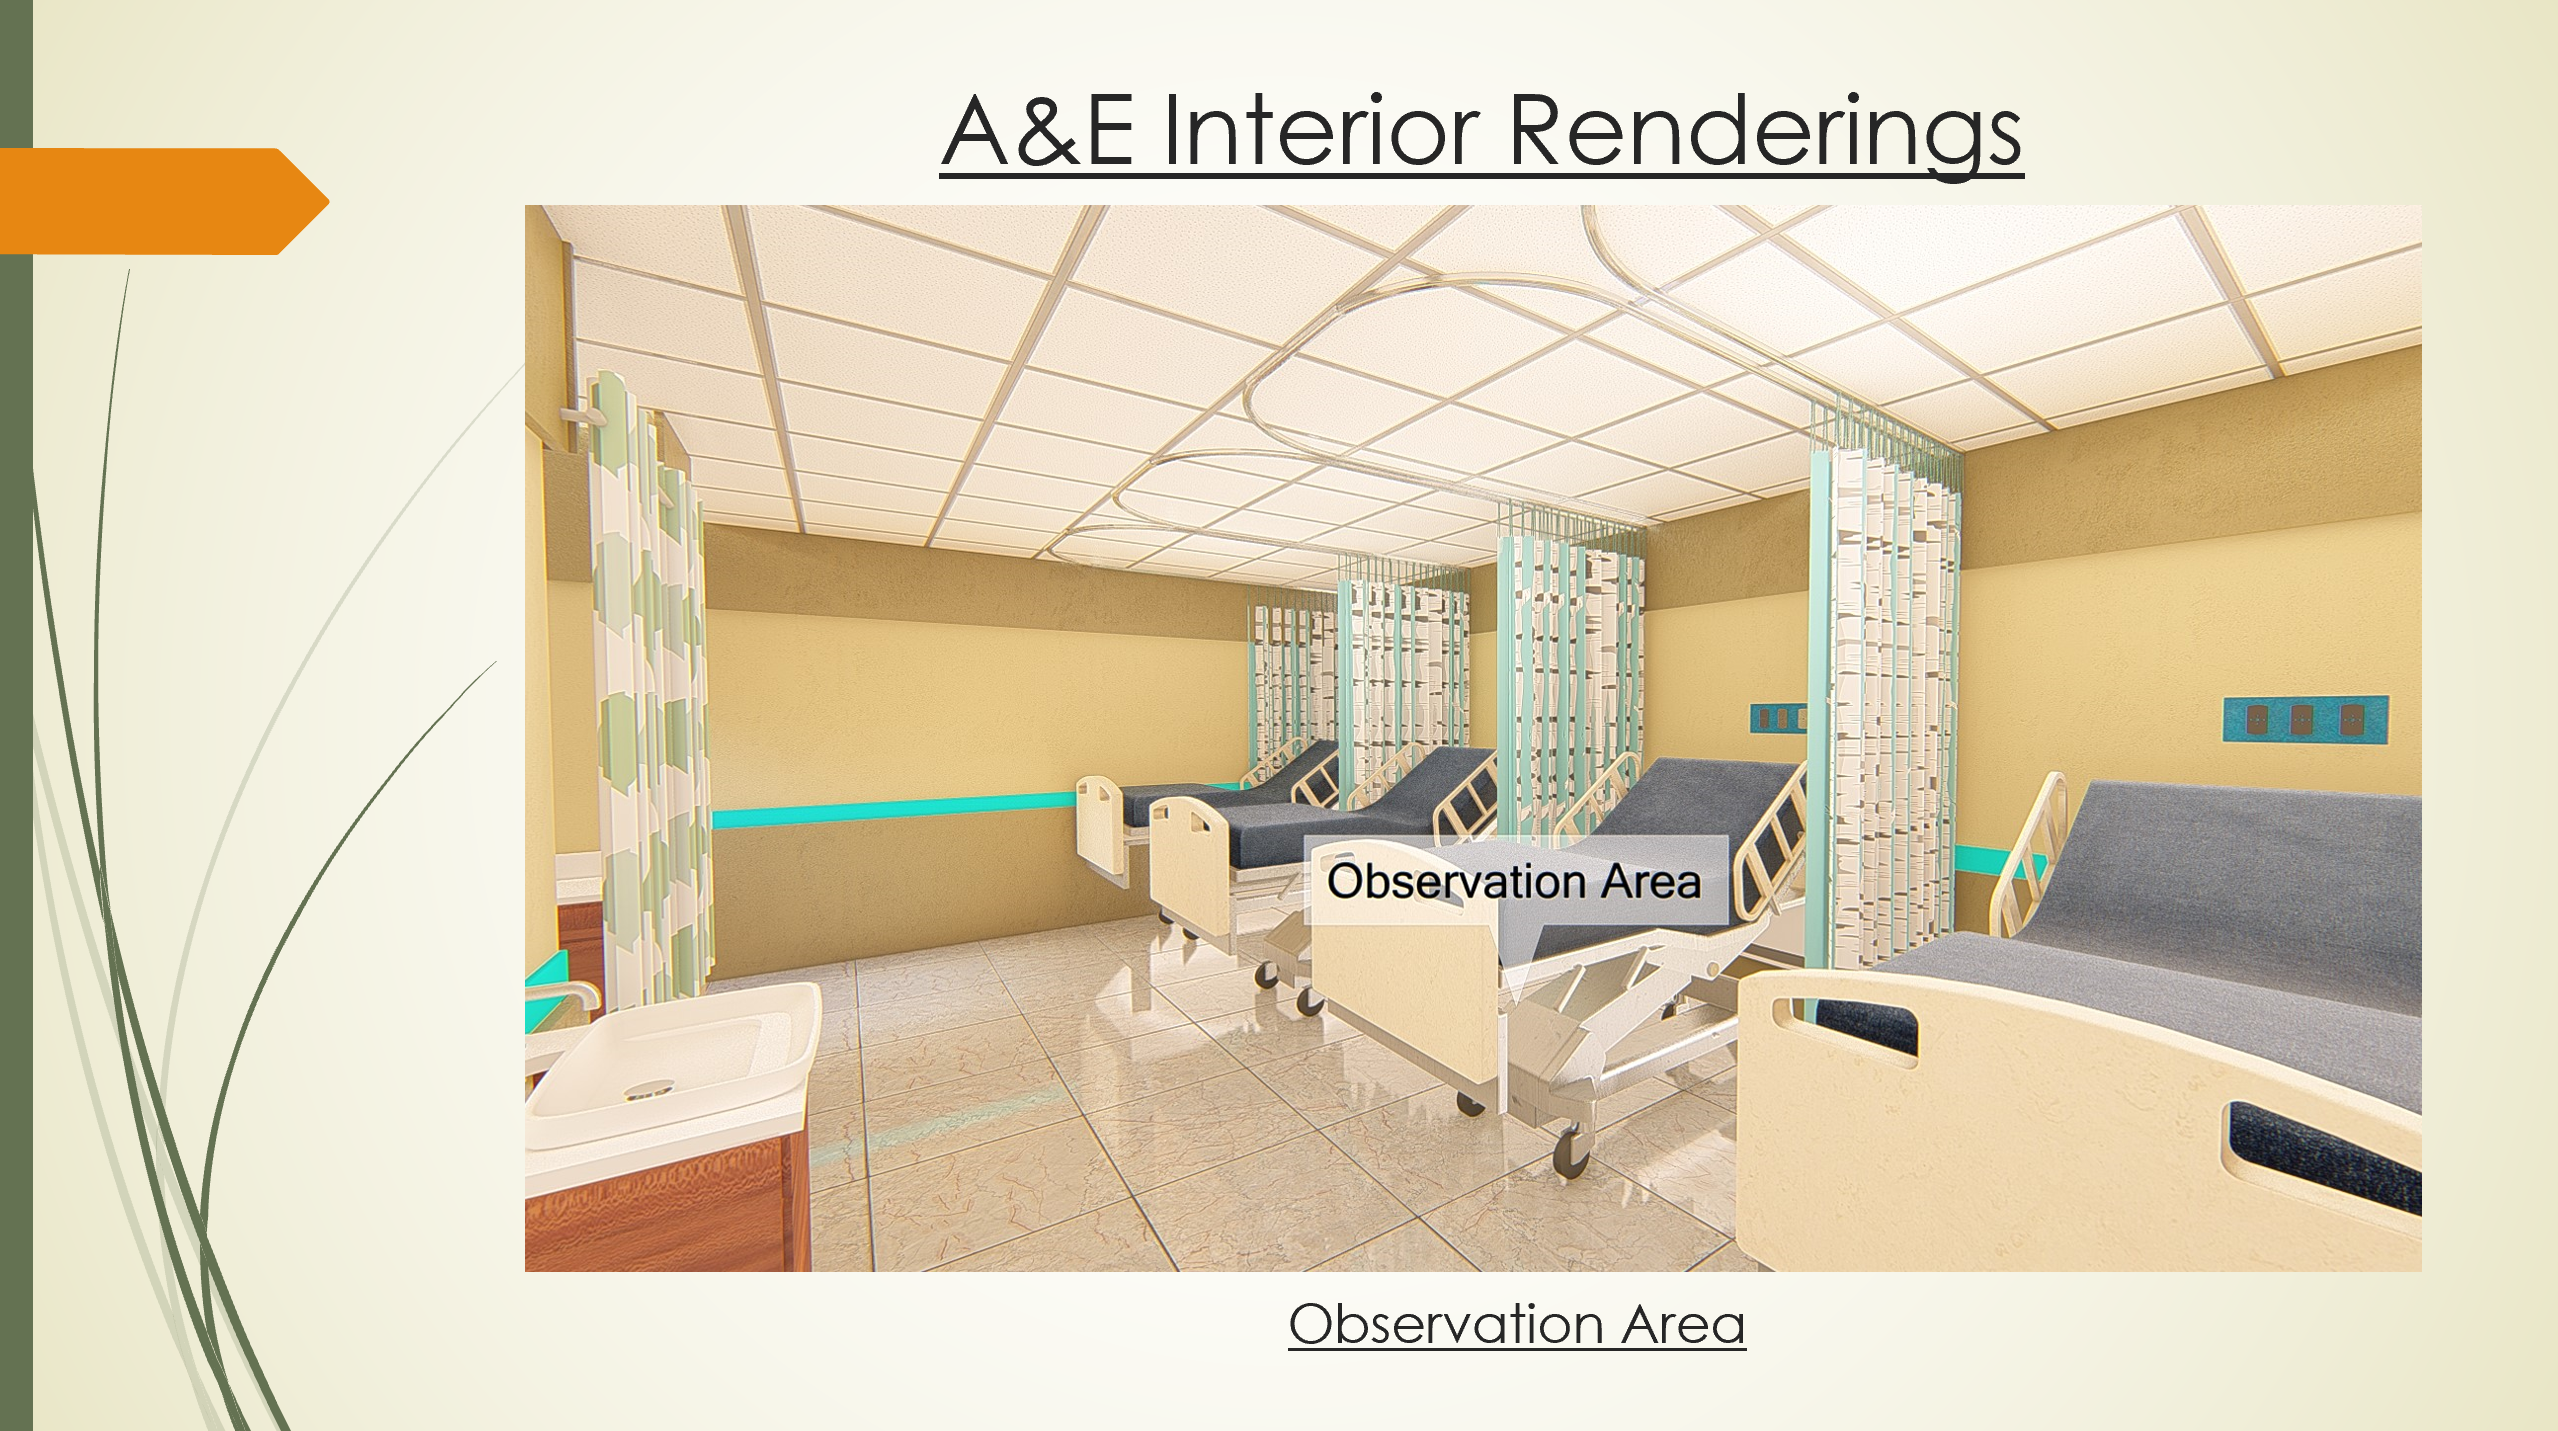 Rendering of the Observation Area for PG Community Hospital